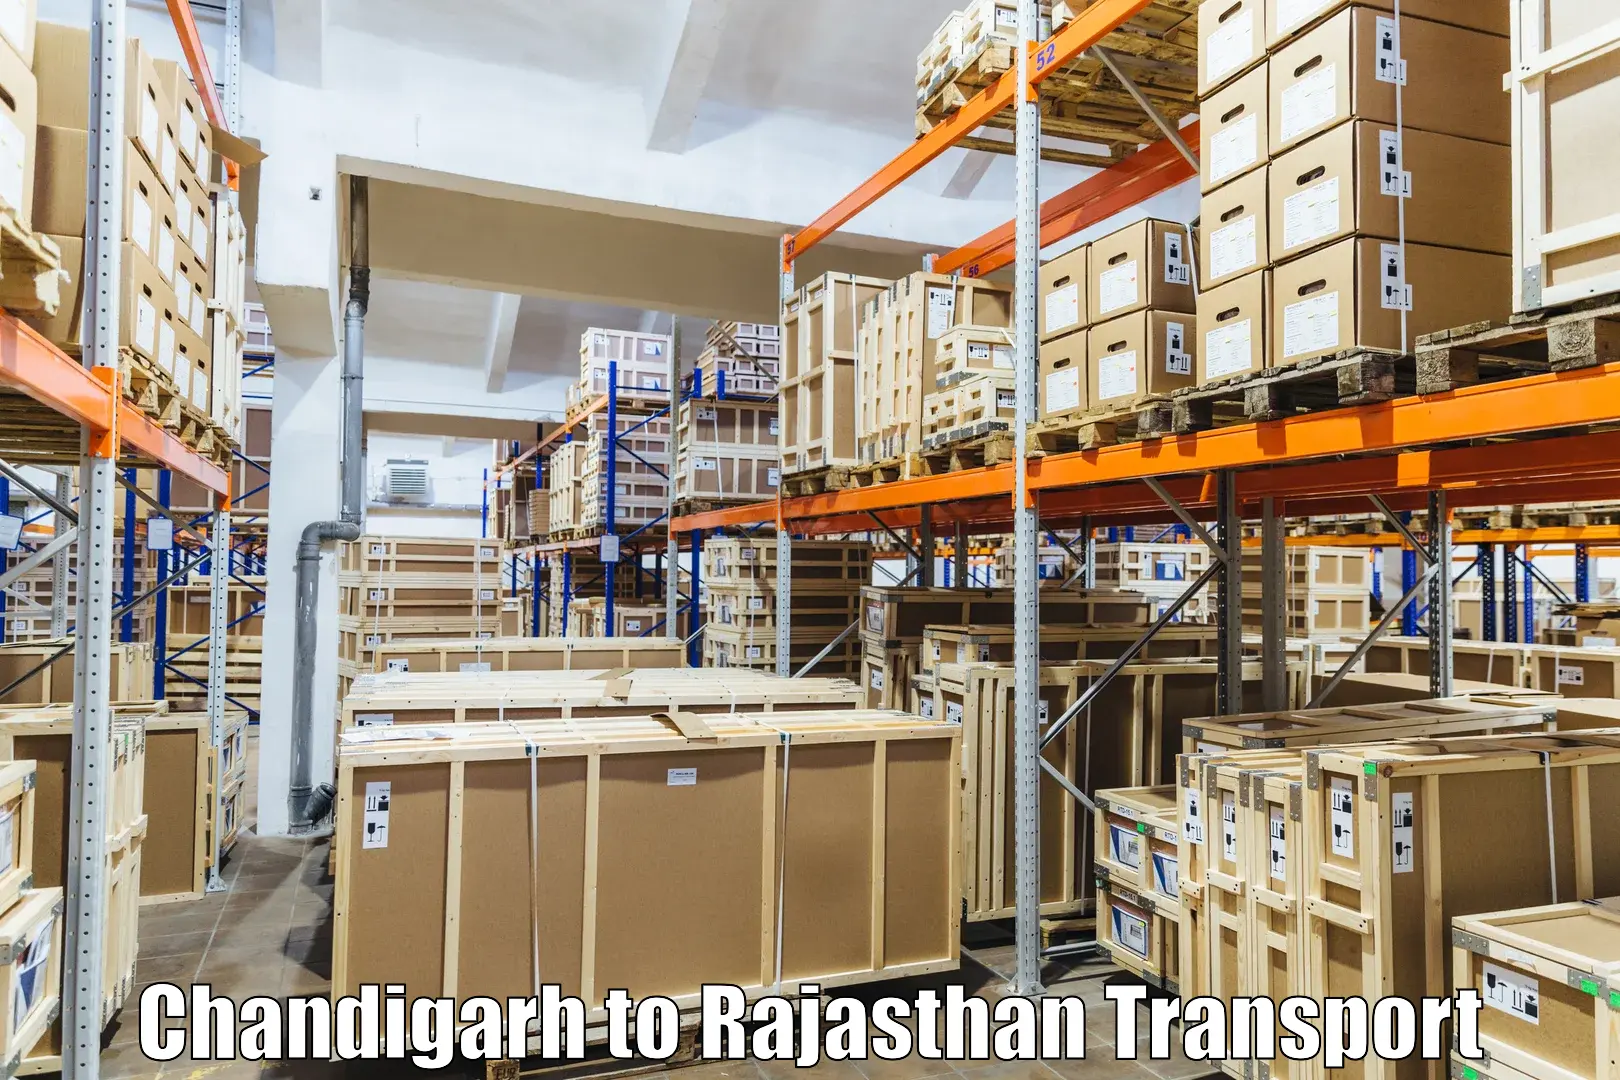 Vehicle transport services Chandigarh to Kaman